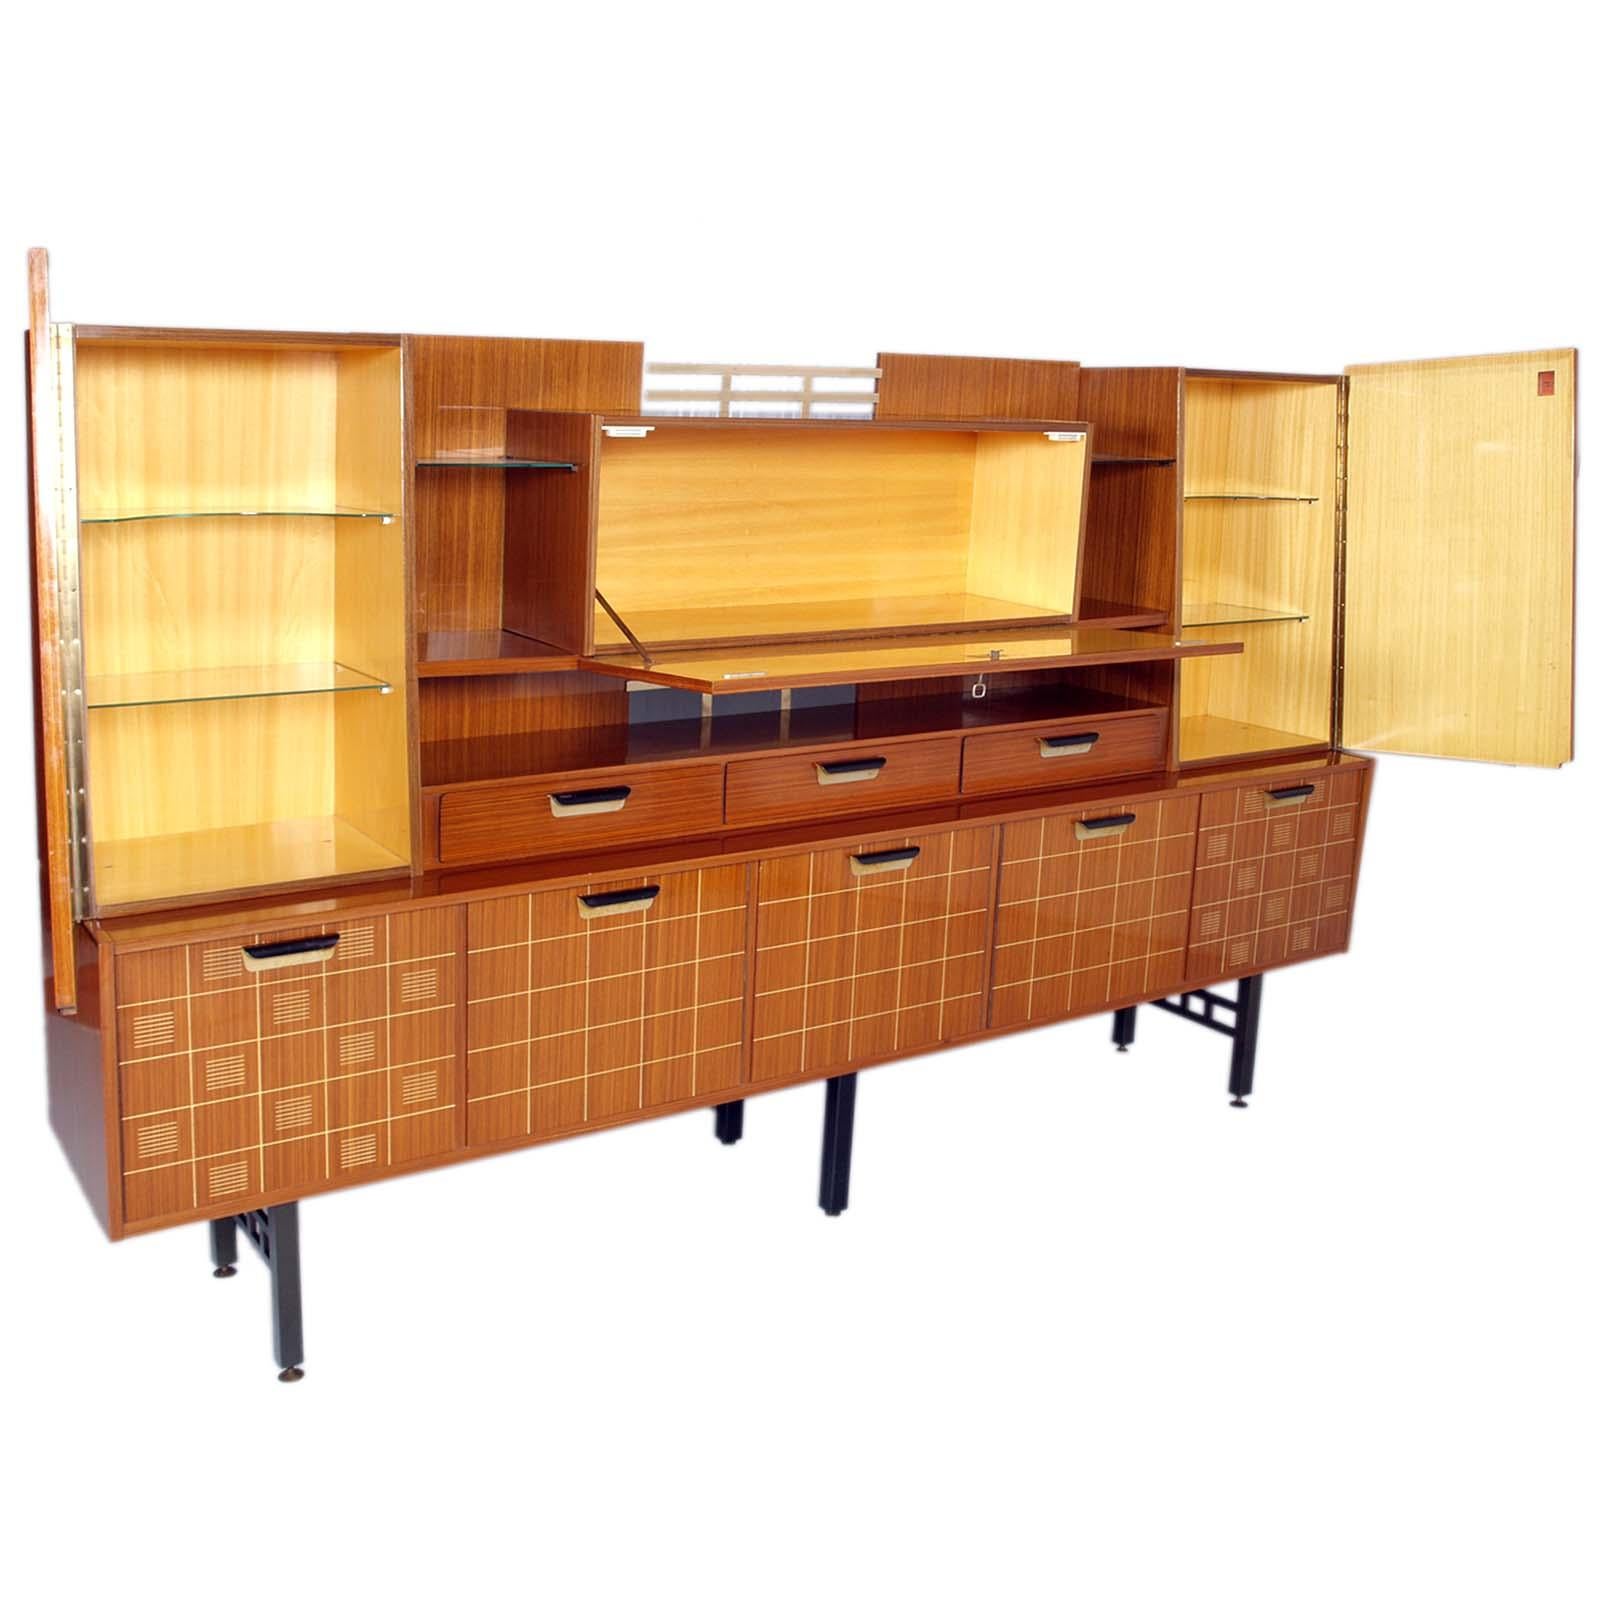 Mid-Century Modern 1960s Sideboard La Permanente Mobili Cantù in Veneered Rosewood with Maple Inlay For Sale